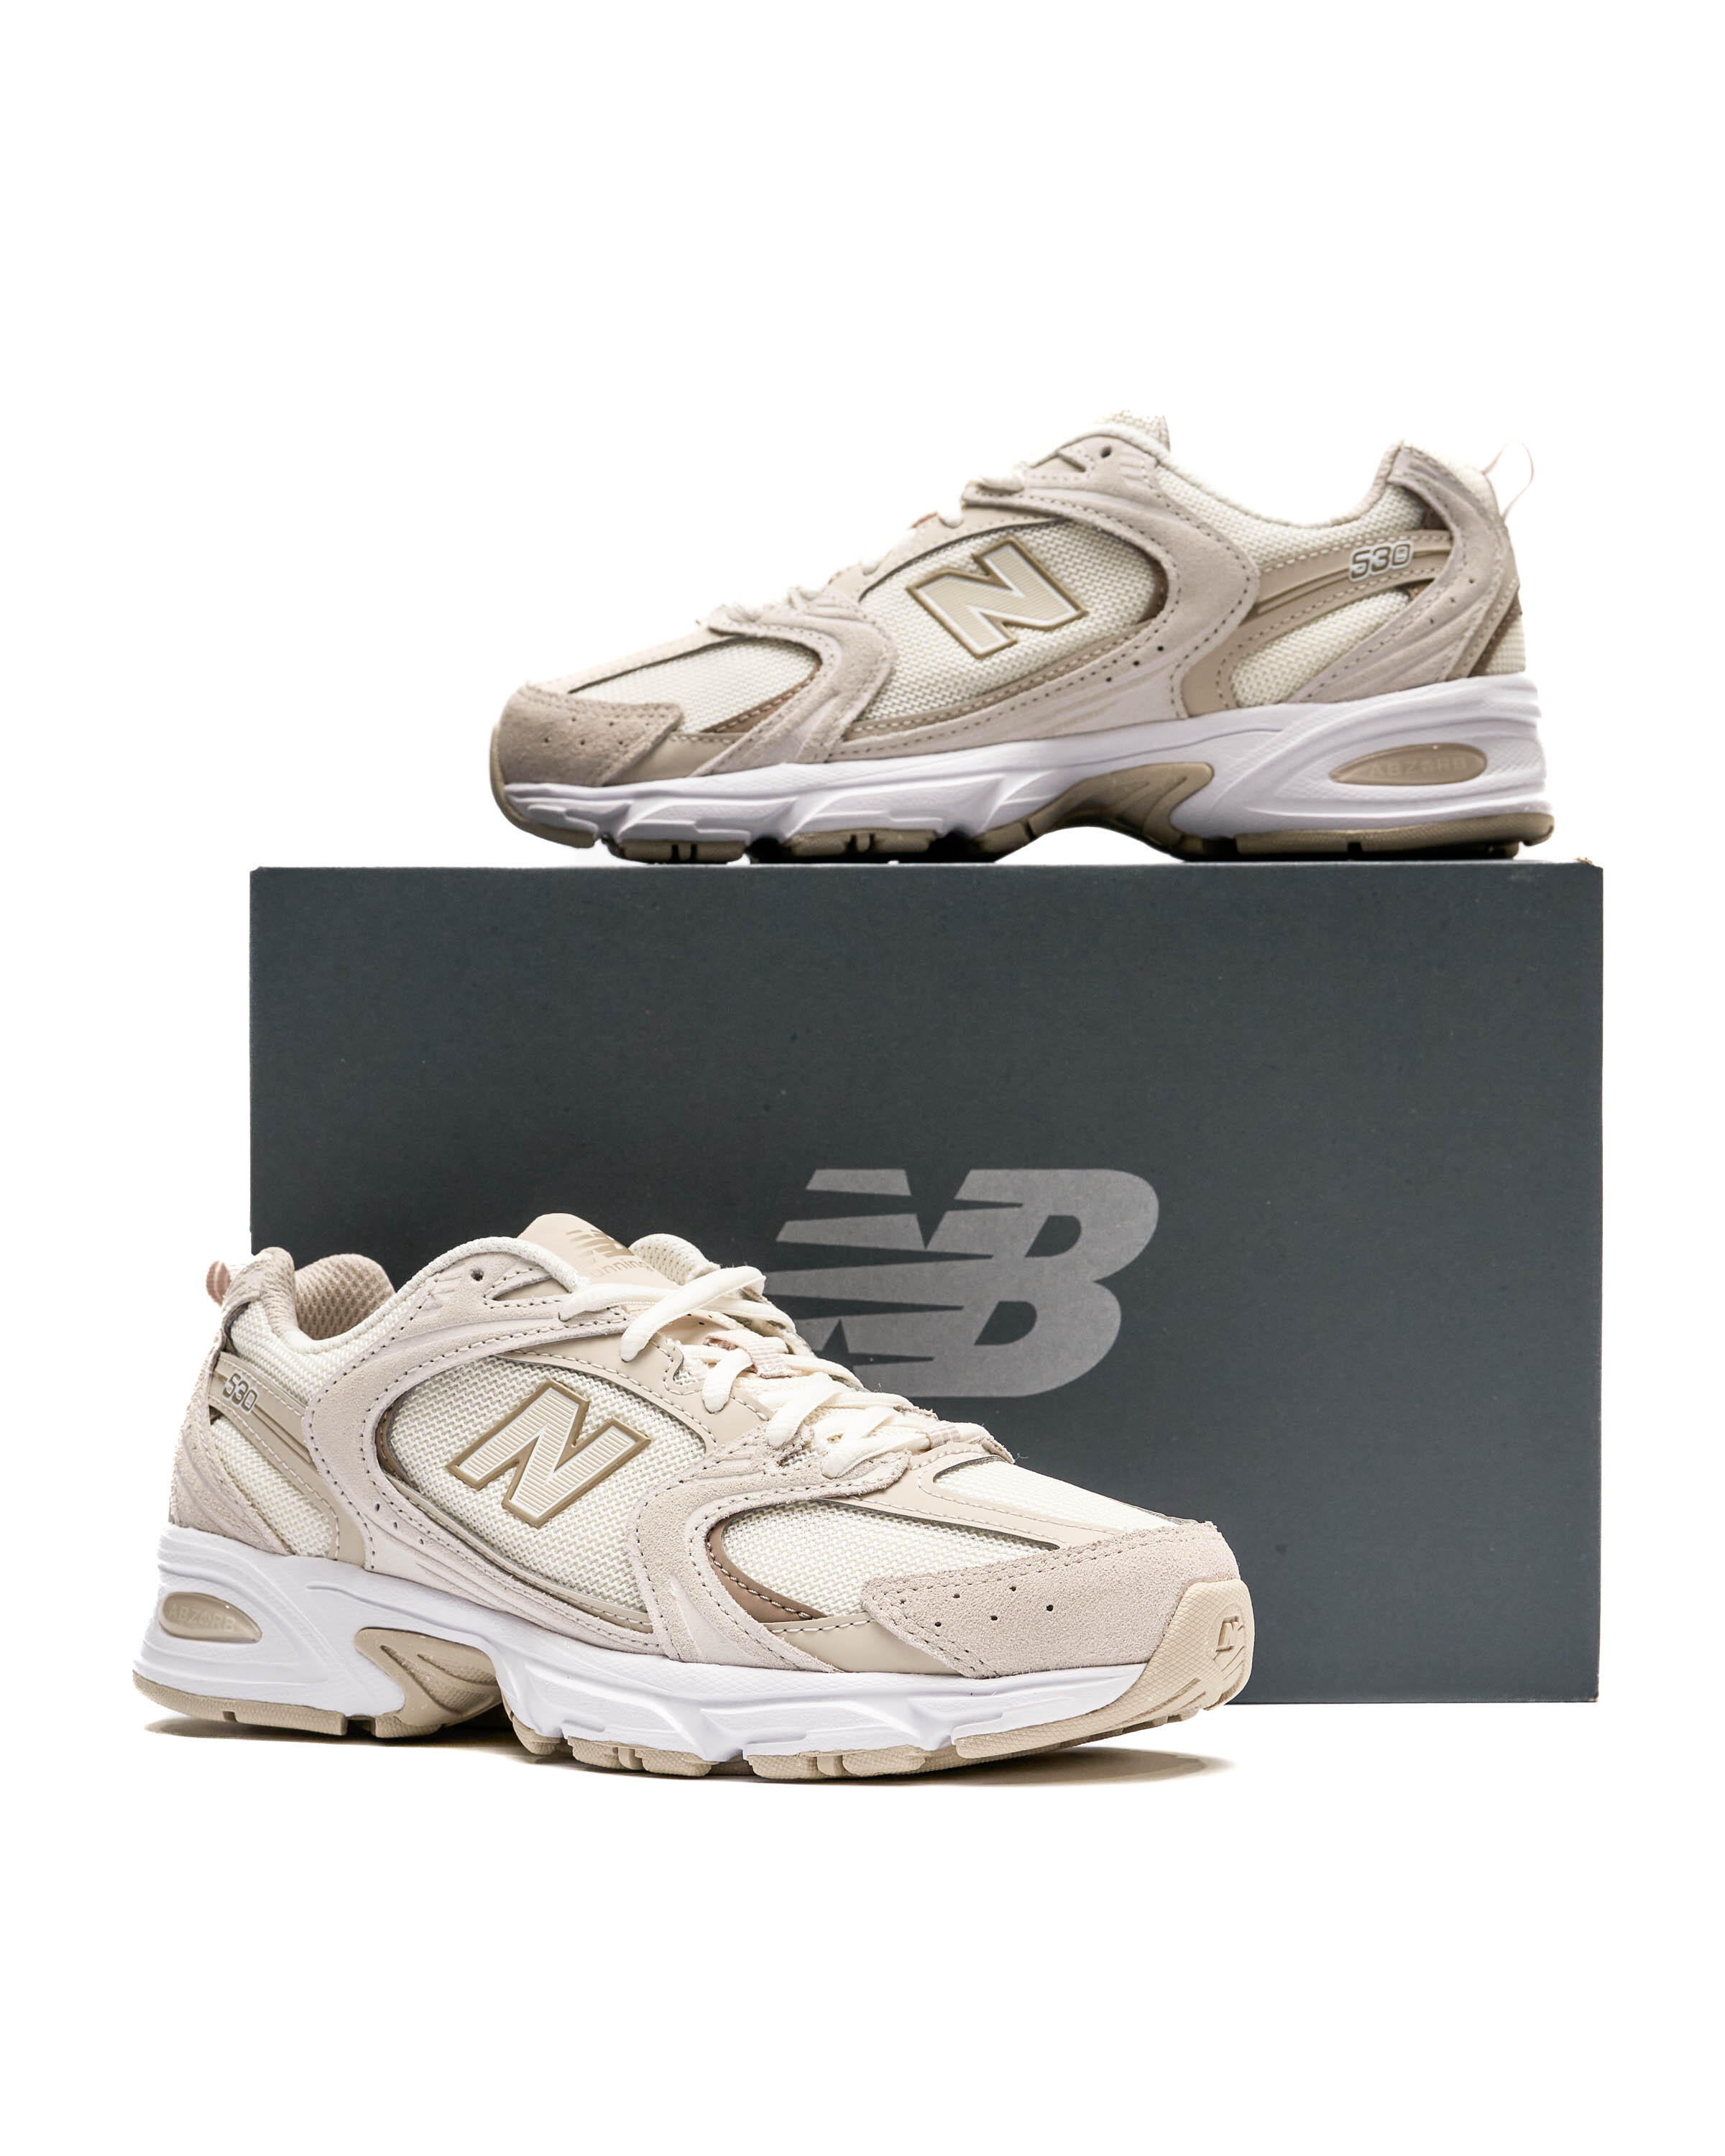 New Balance MR 530 OW | MR530OW | AFEW STORE